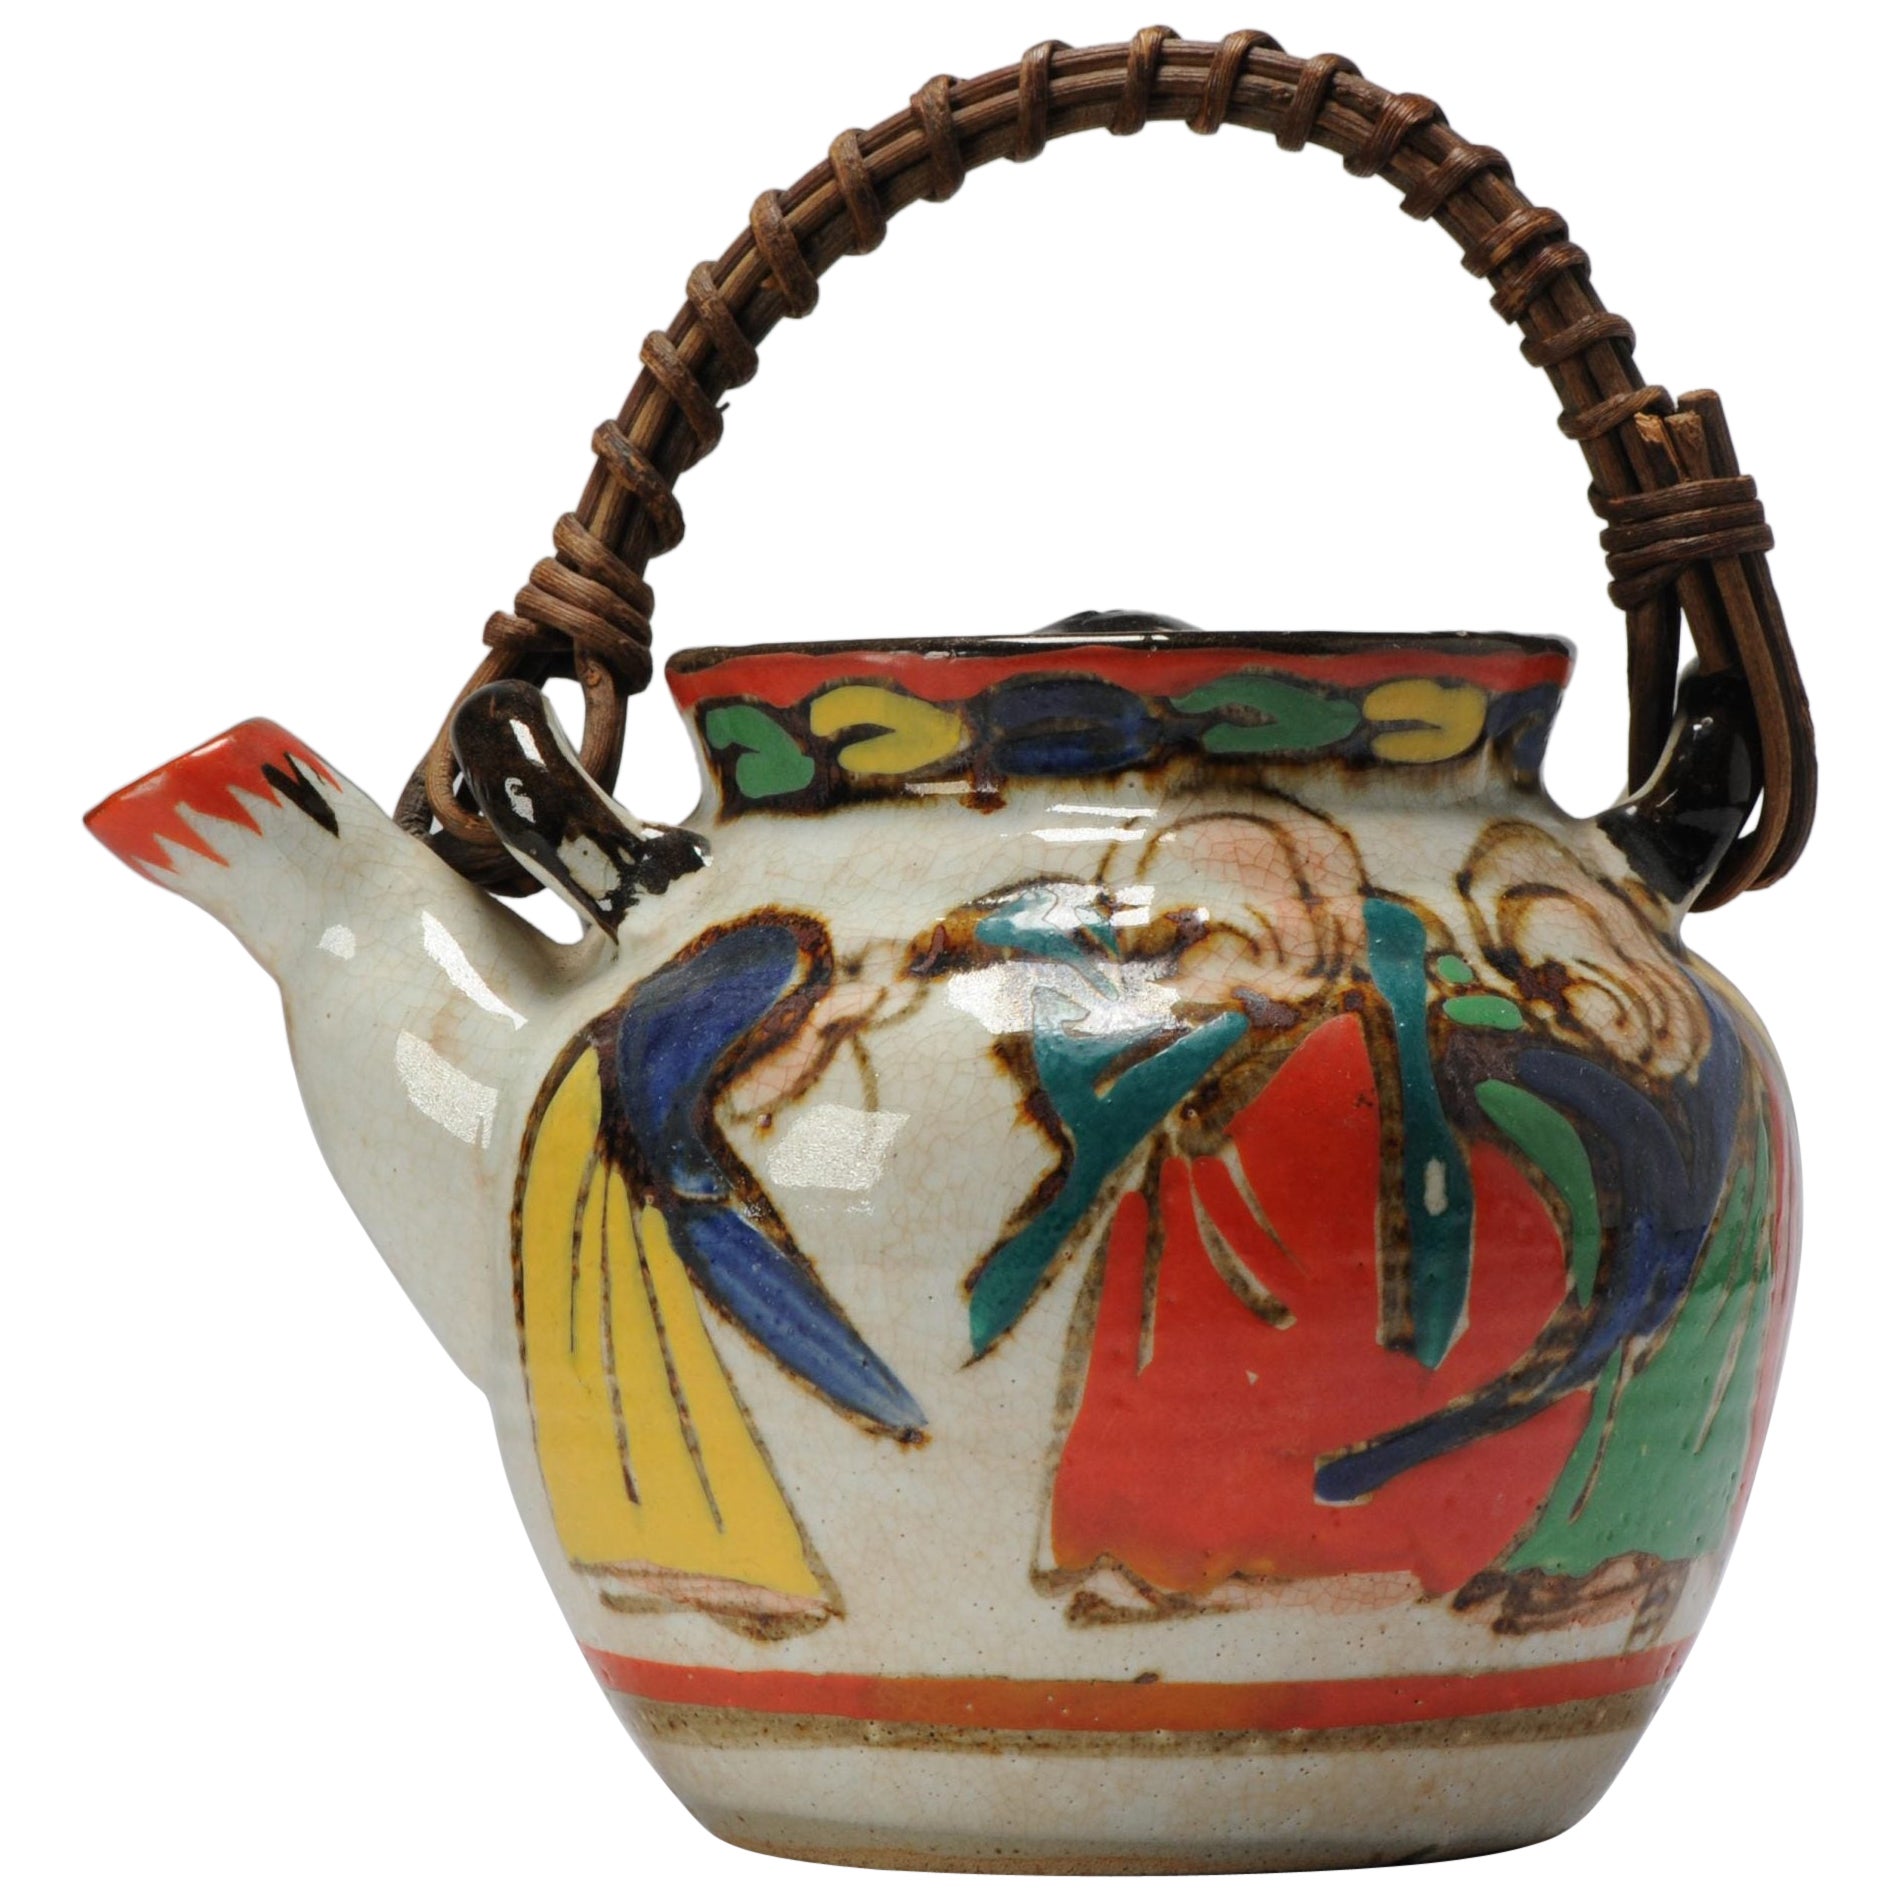 Antique/Vintage Colorfull Teapot with Figures and Handle, 20th Century